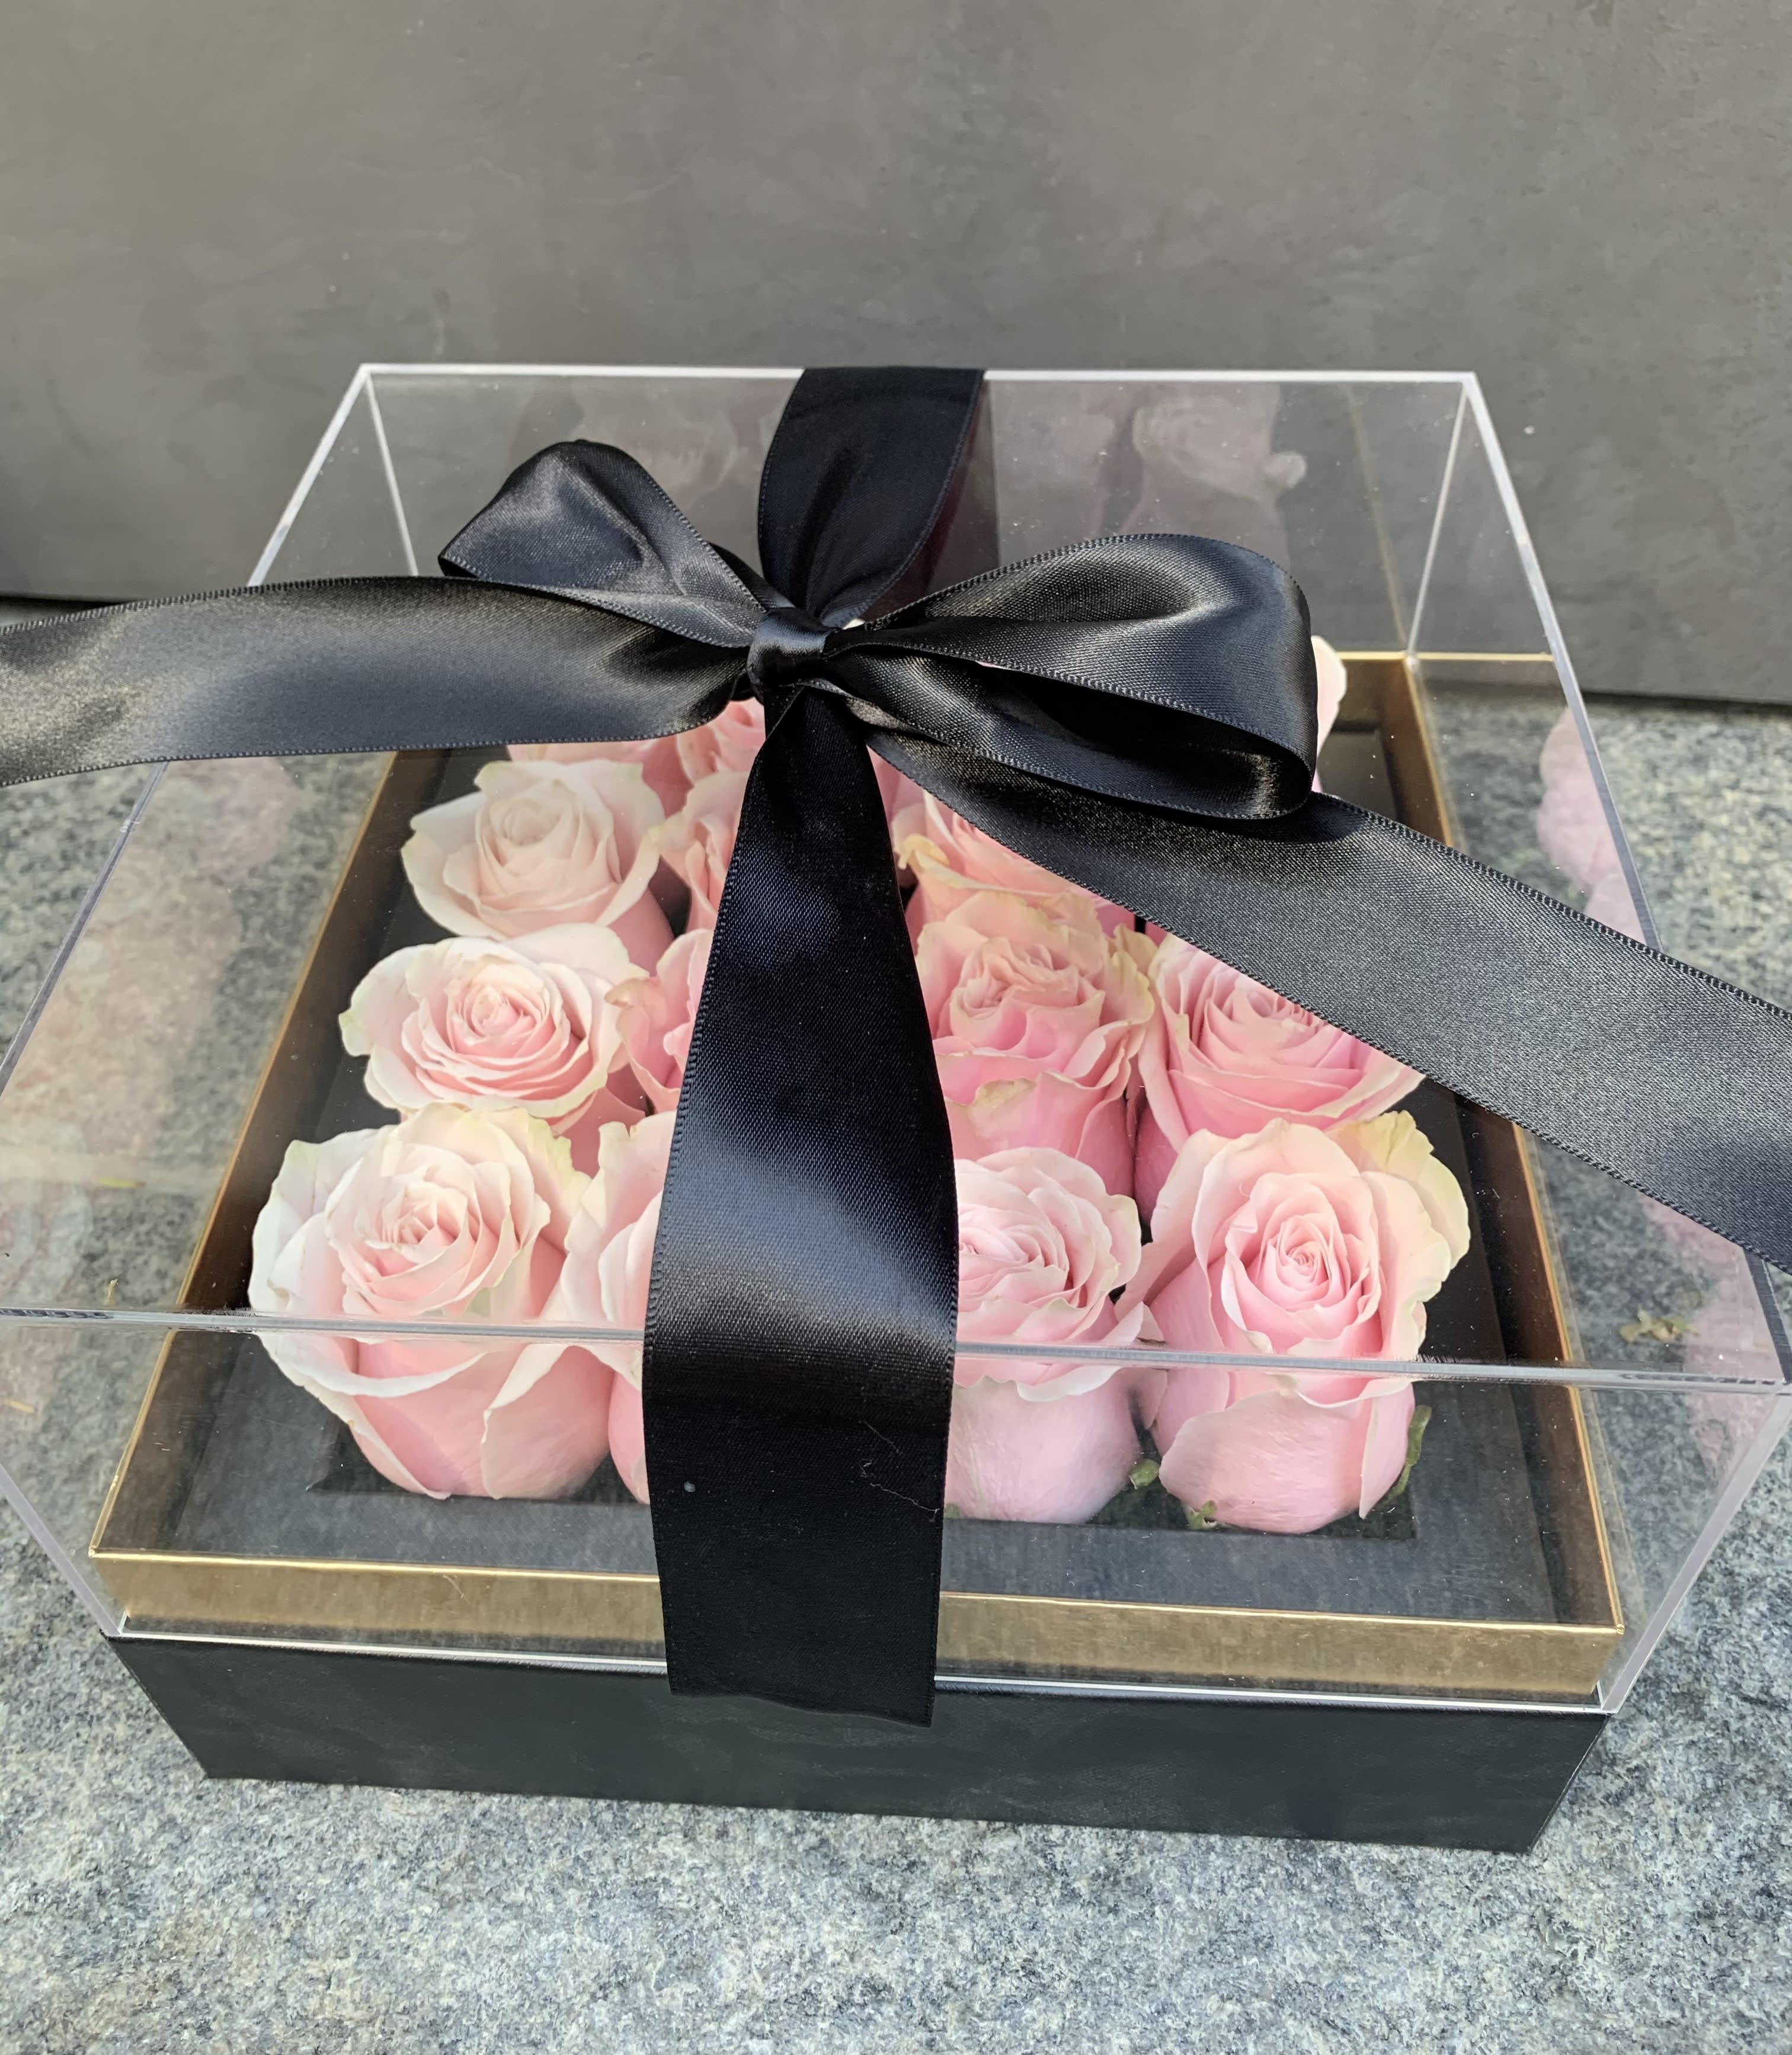 Blush pink  box  - 16 blush pink roses  these are premium  first quality  fresh roses in a very elegant  clear box  great gift